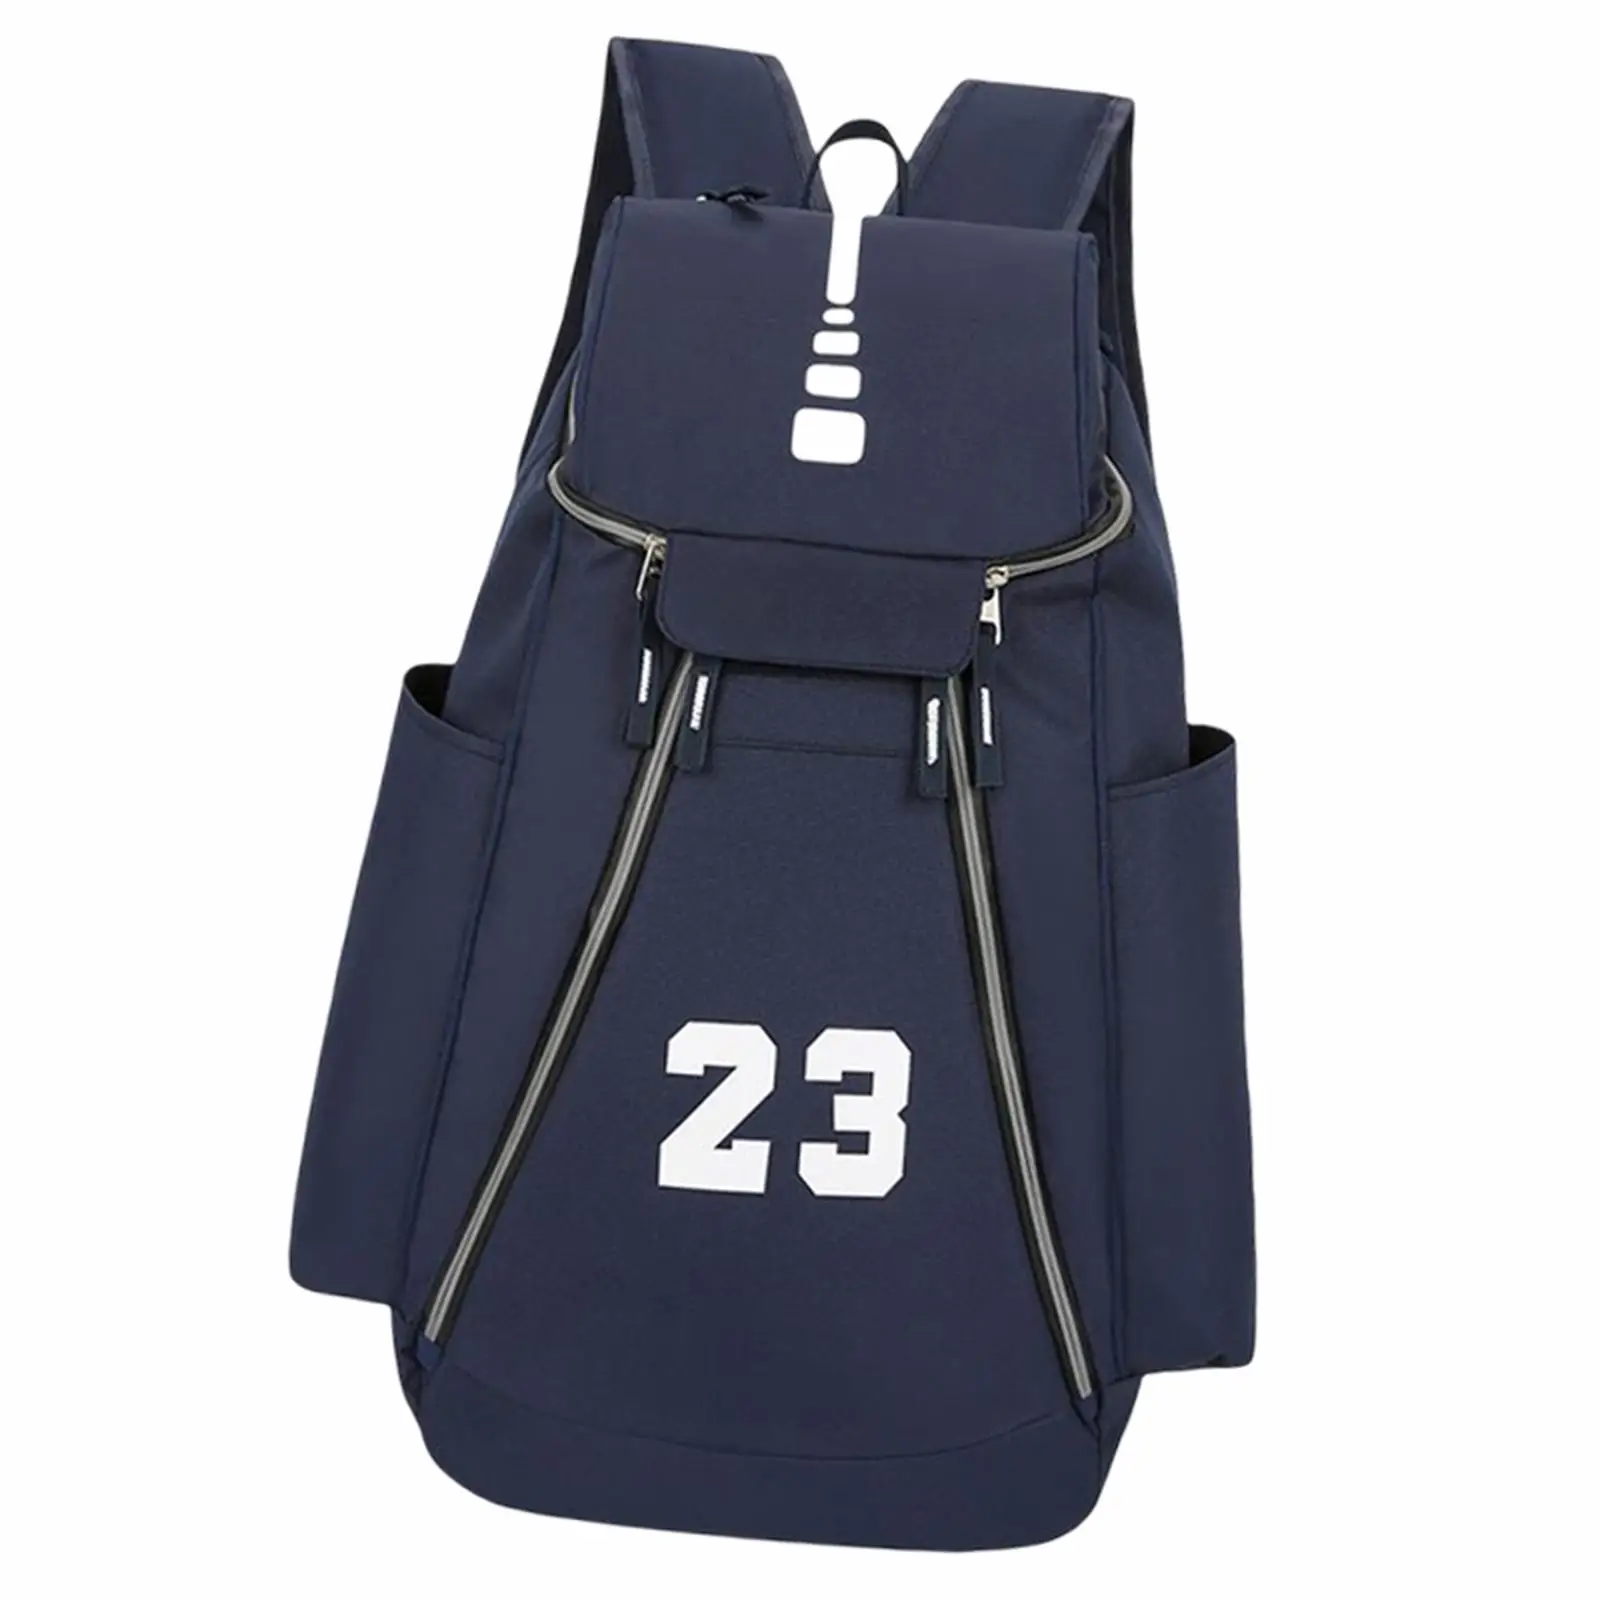 Oxford Cloth Basketball Backpack Adjustable Straps Daypack Durable sports Shoulder Bag for Running Cycling Yoga School